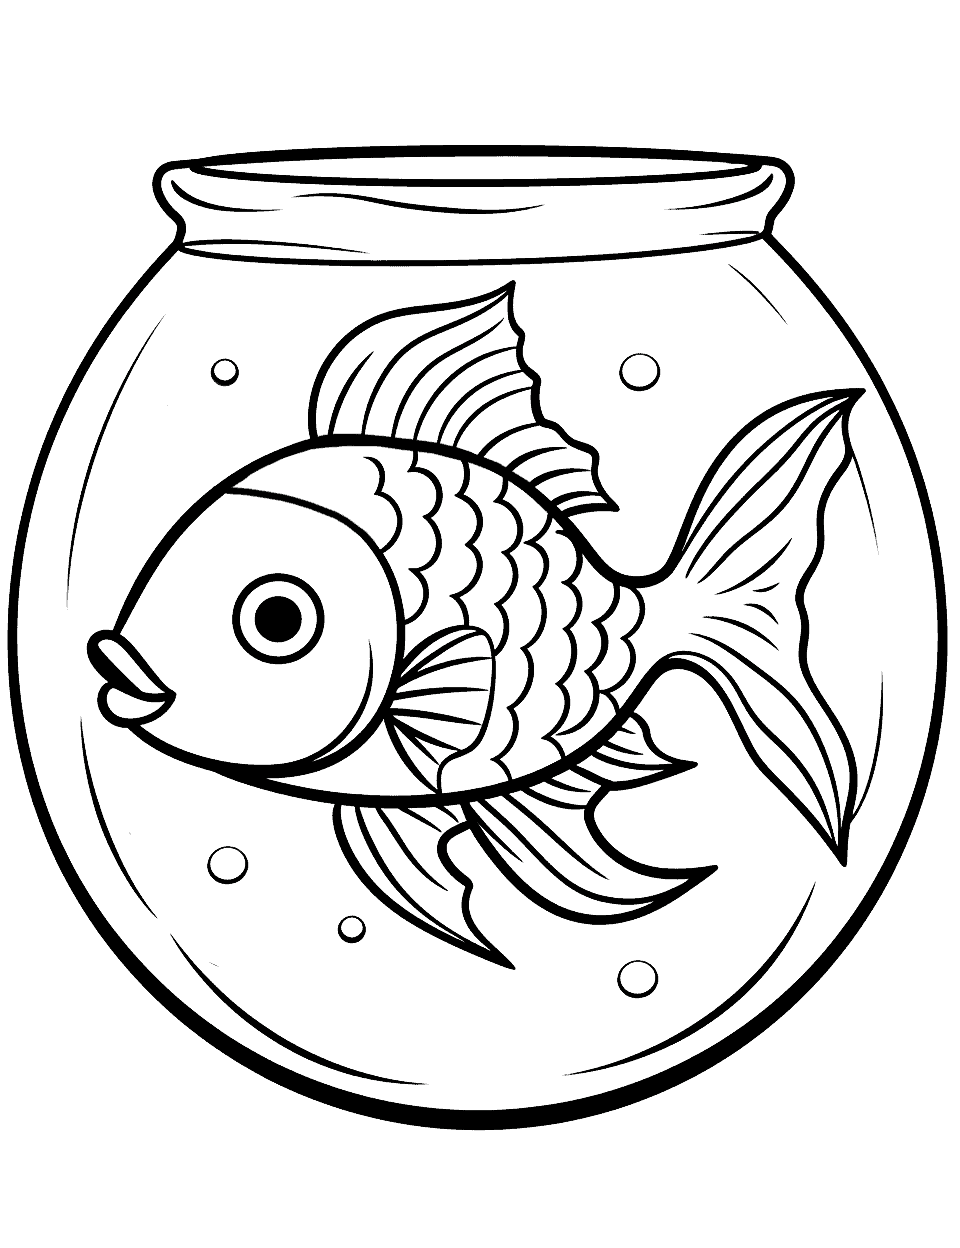 Gold Fish in a Bowl Coloring Page - A lonely goldfish, swimming circles in its transparent bowl.